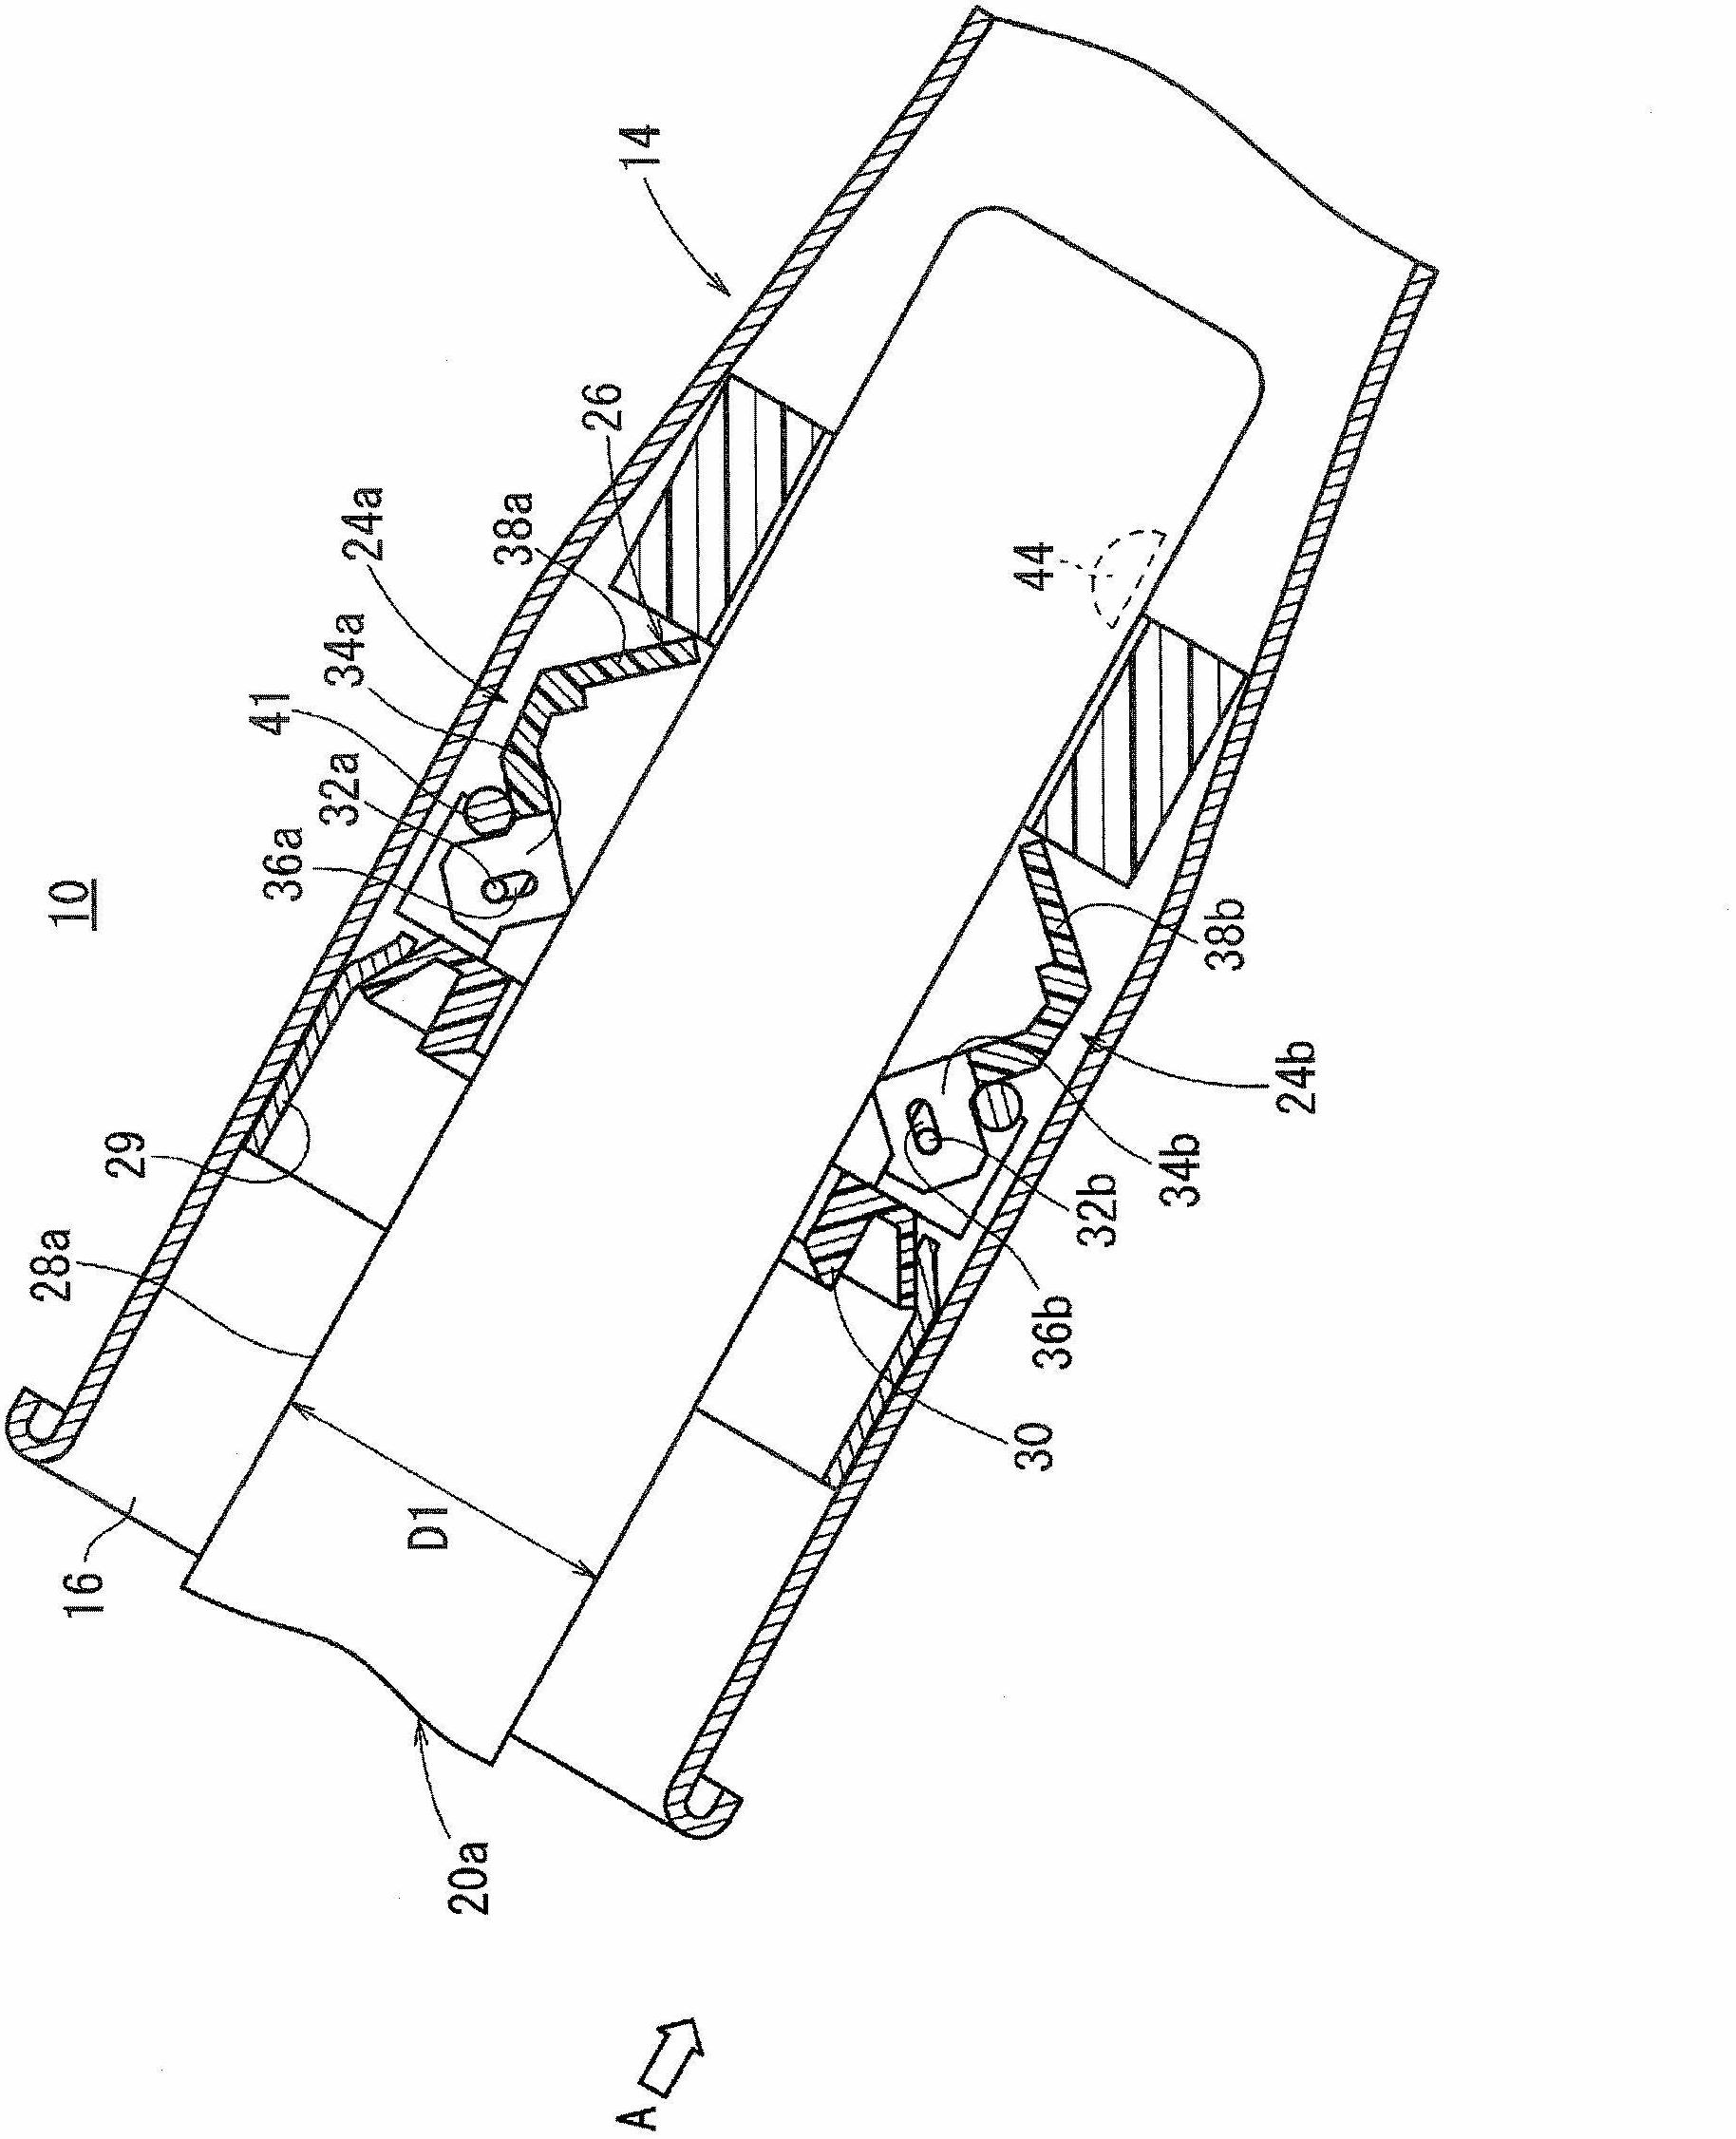 Fuel filling pipe device for vehicle